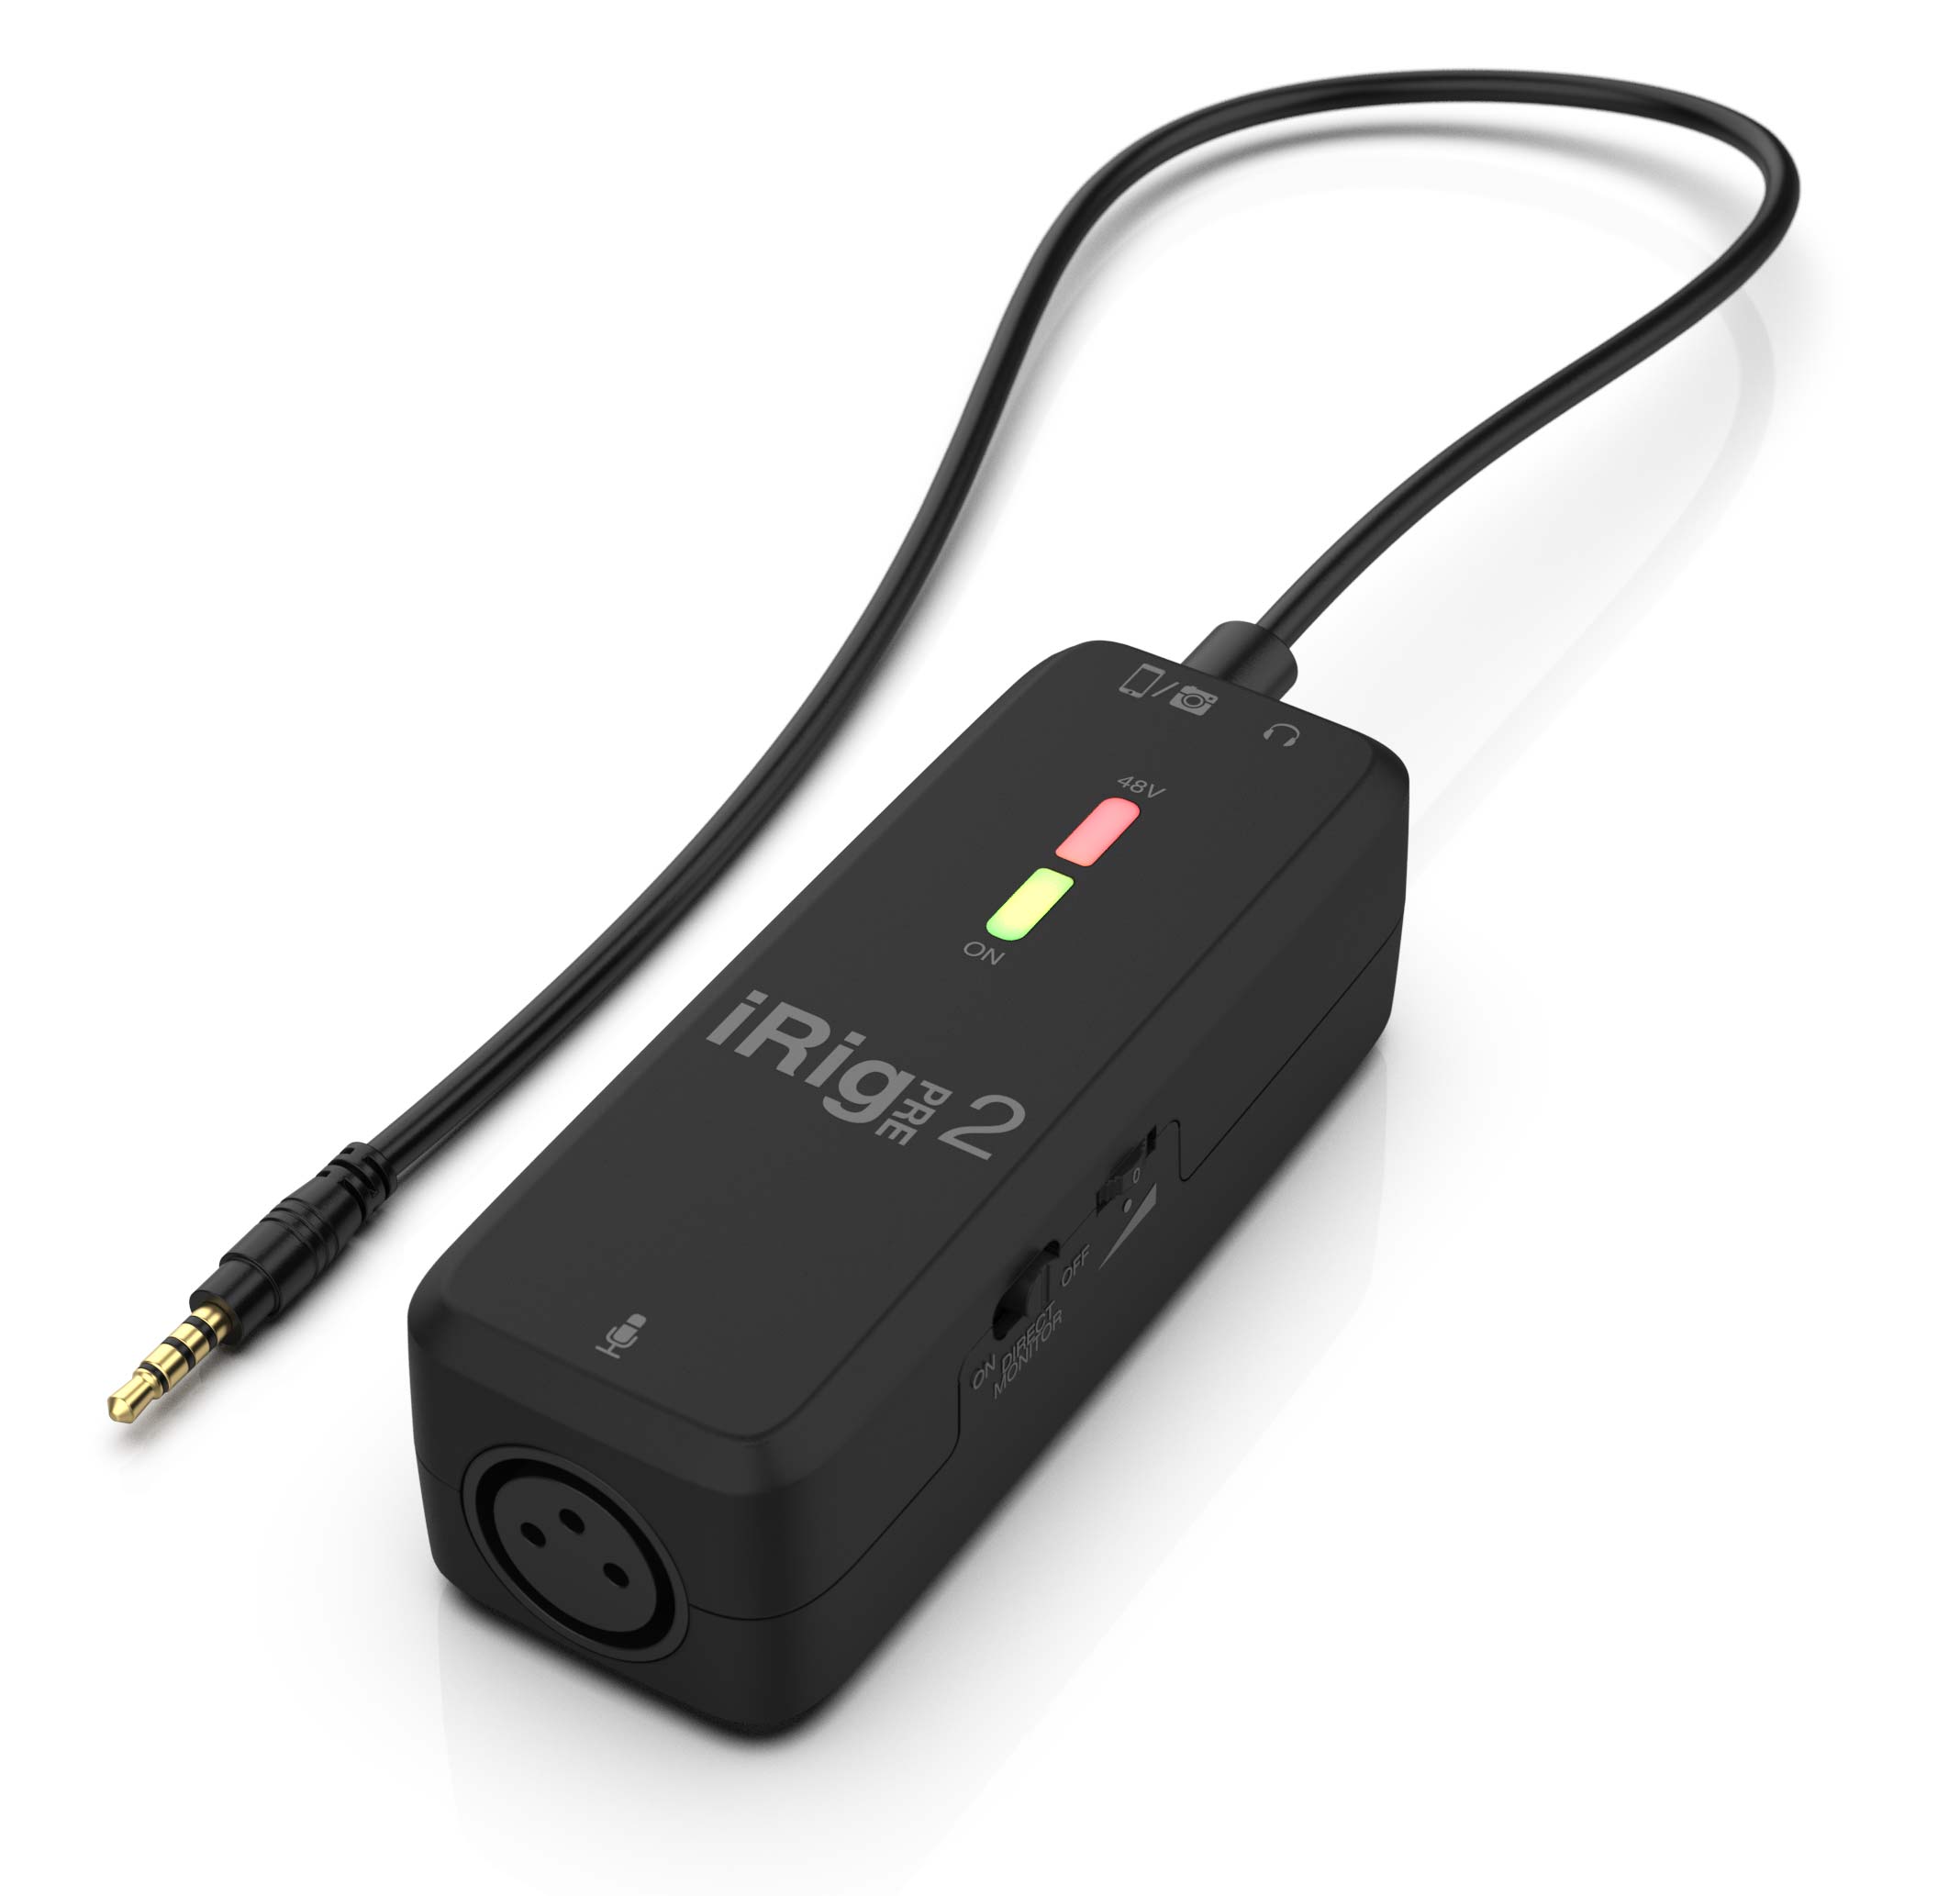 iRig Pre 2 mobile microphone interface for smartphones and DSLR